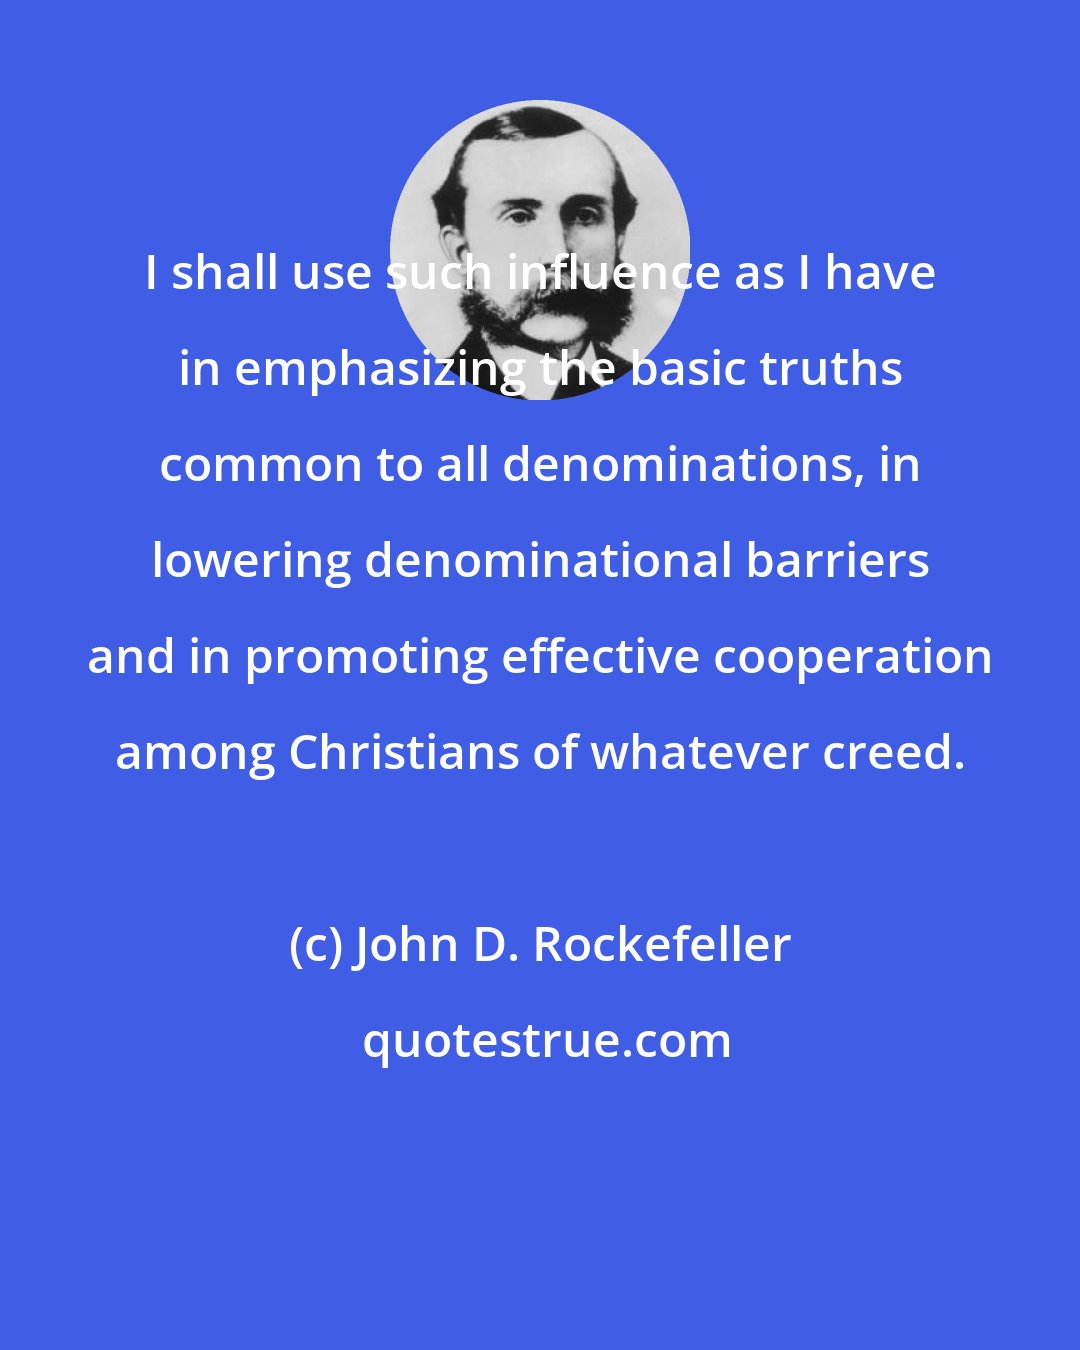 John D. Rockefeller: I shall use such influence as I have in emphasizing the basic truths common to all denominations, in lowering denominational barriers and in promoting effective cooperation among Christians of whatever creed.